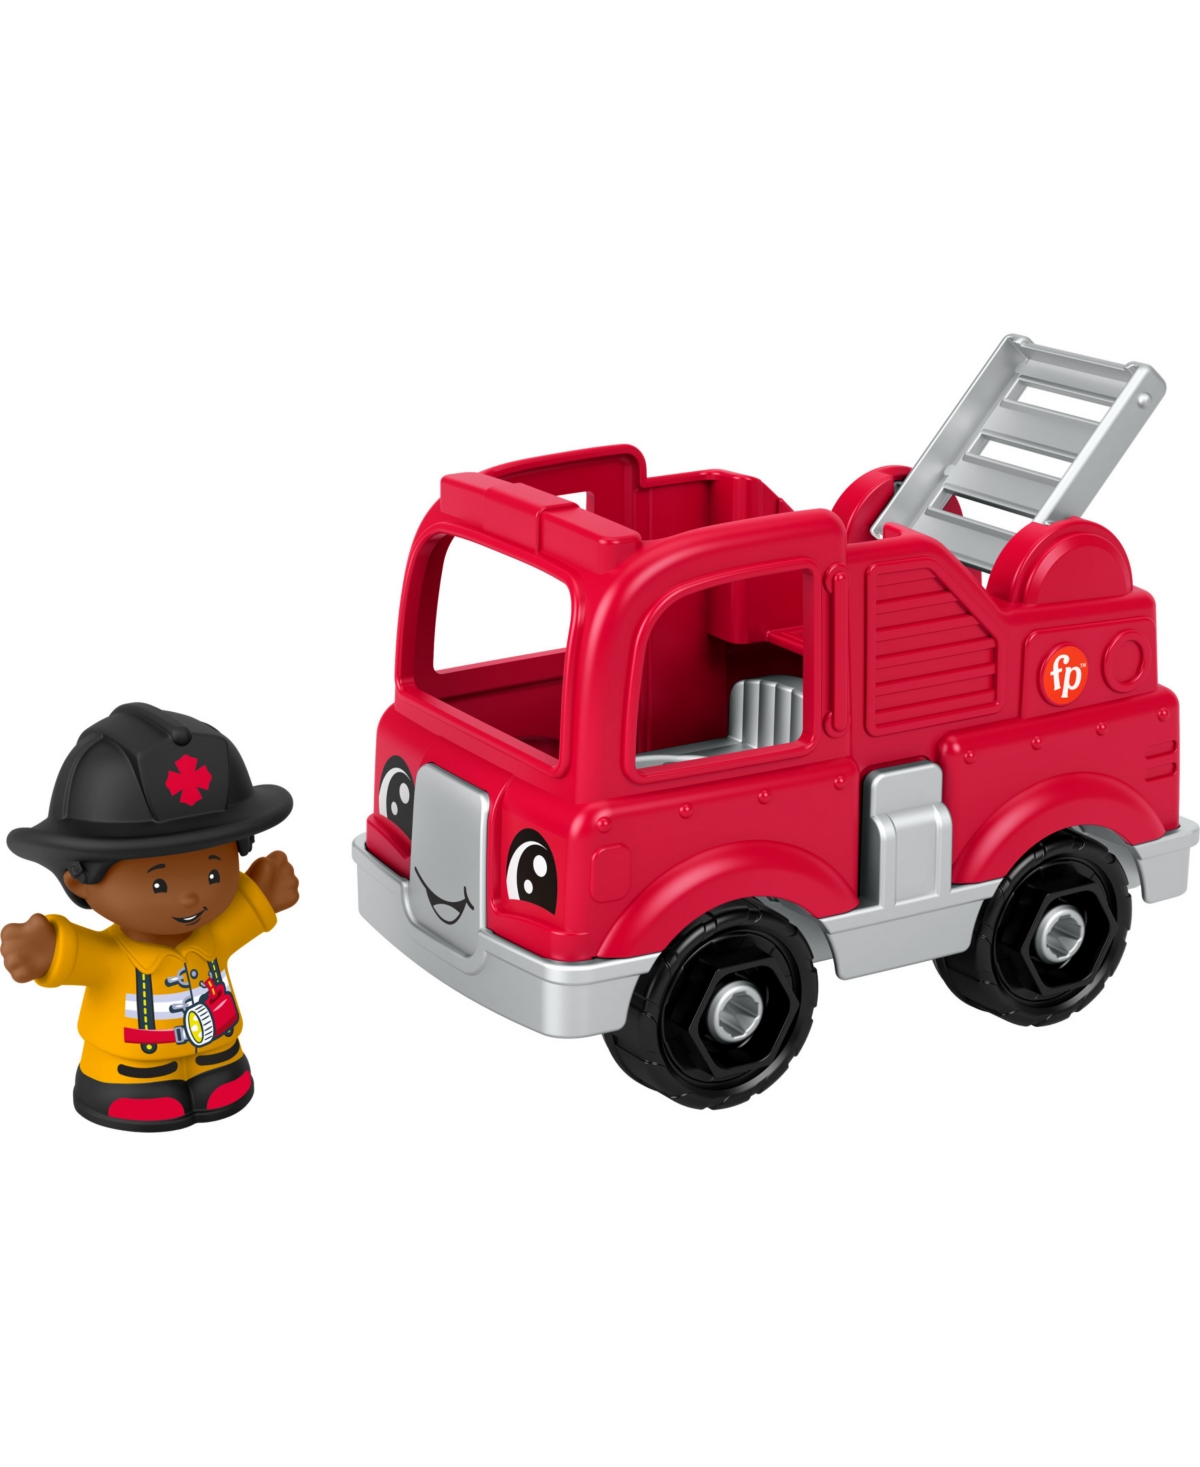 Fisher Price Kids' Little People Toy Firetruck And Firefighter Figure Set For Toddlers, 2 Pieces In Multi-color